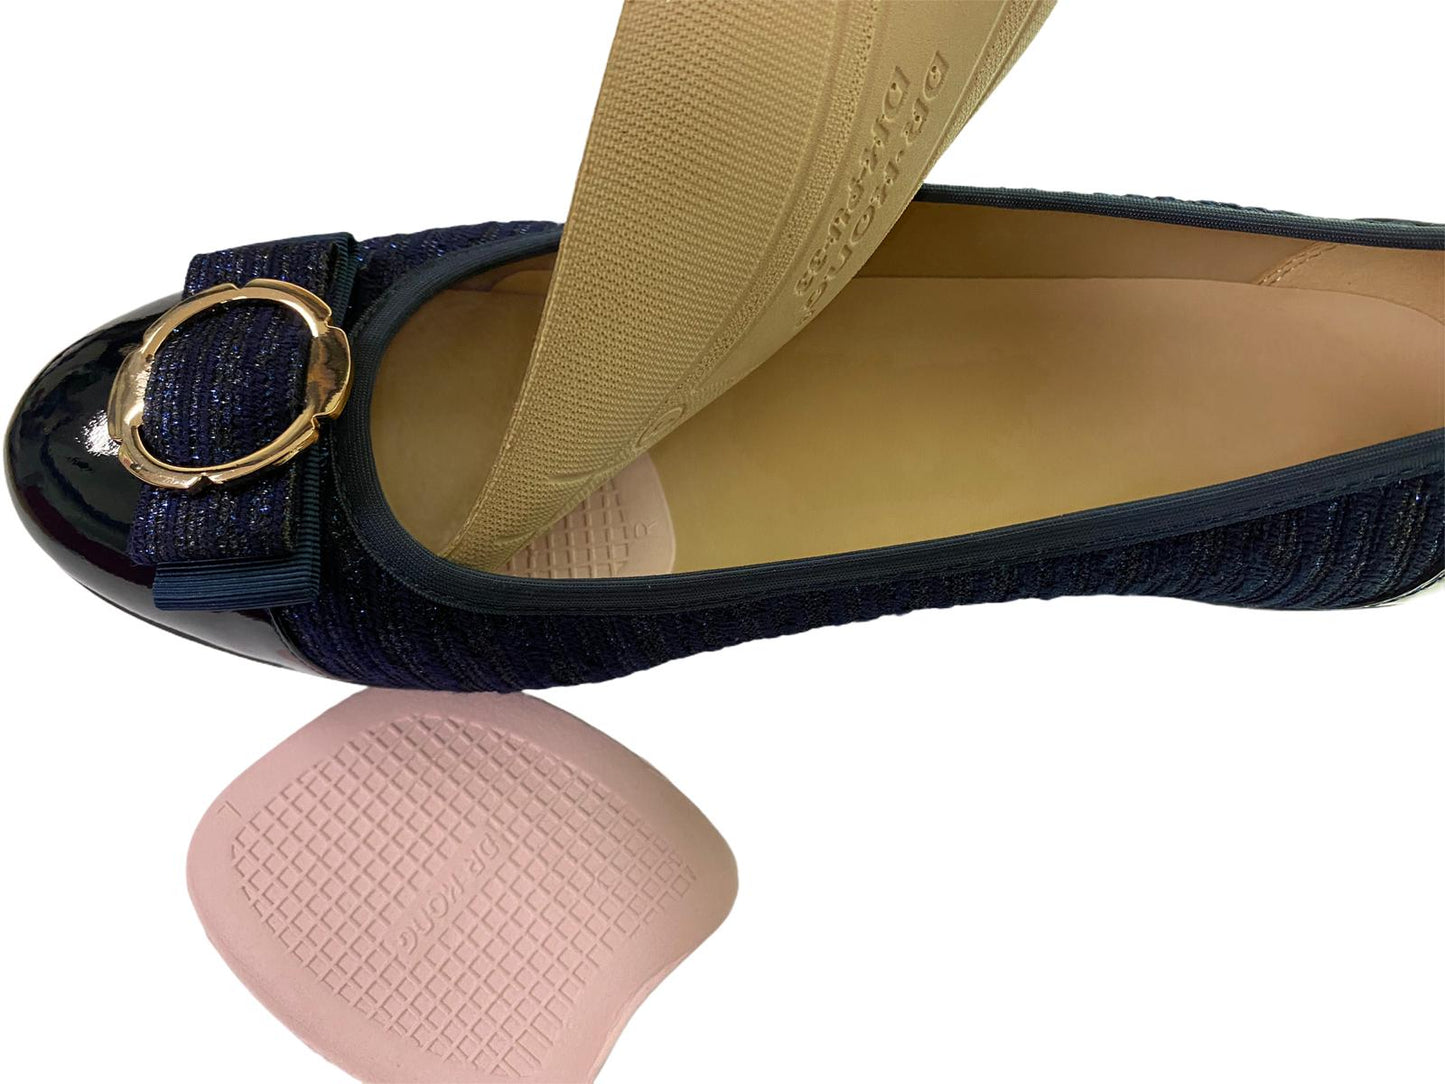 DR.KONG EVA FOREFOOT CUSHION DK-A0106-F - FOOT CARE ACCESSORIES(RP : $5.00)